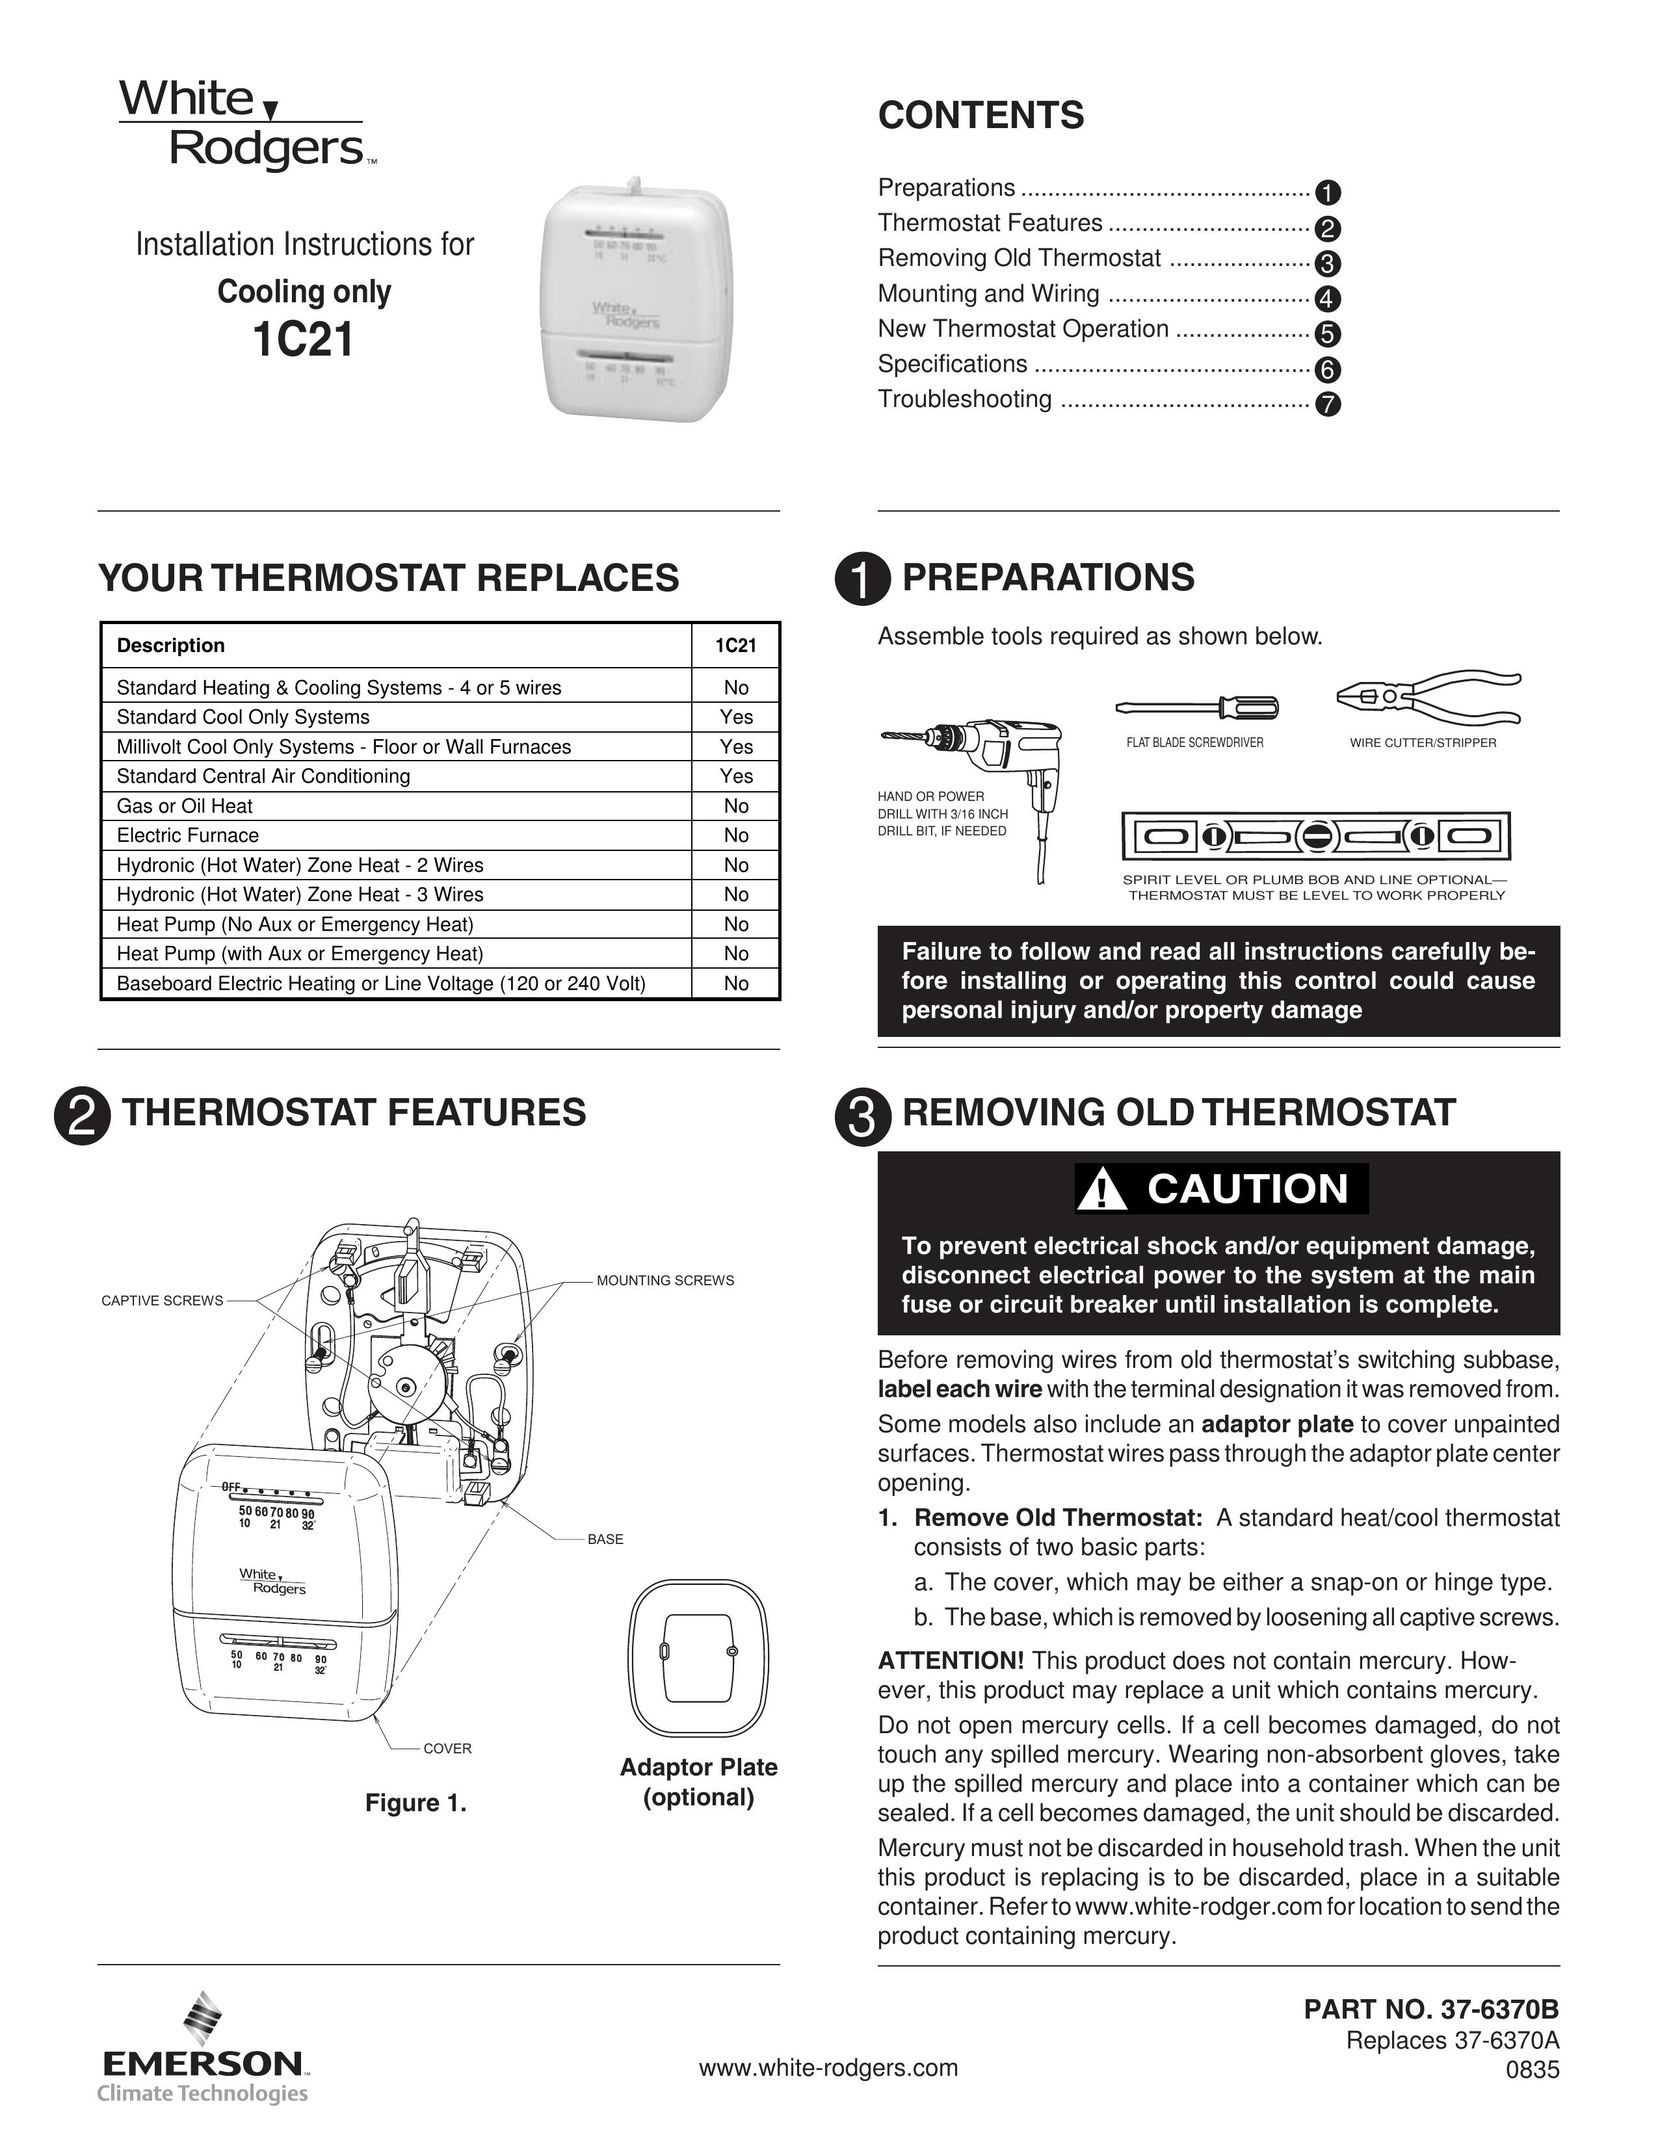 White Rodgers 1C21 Thermostat User Manual